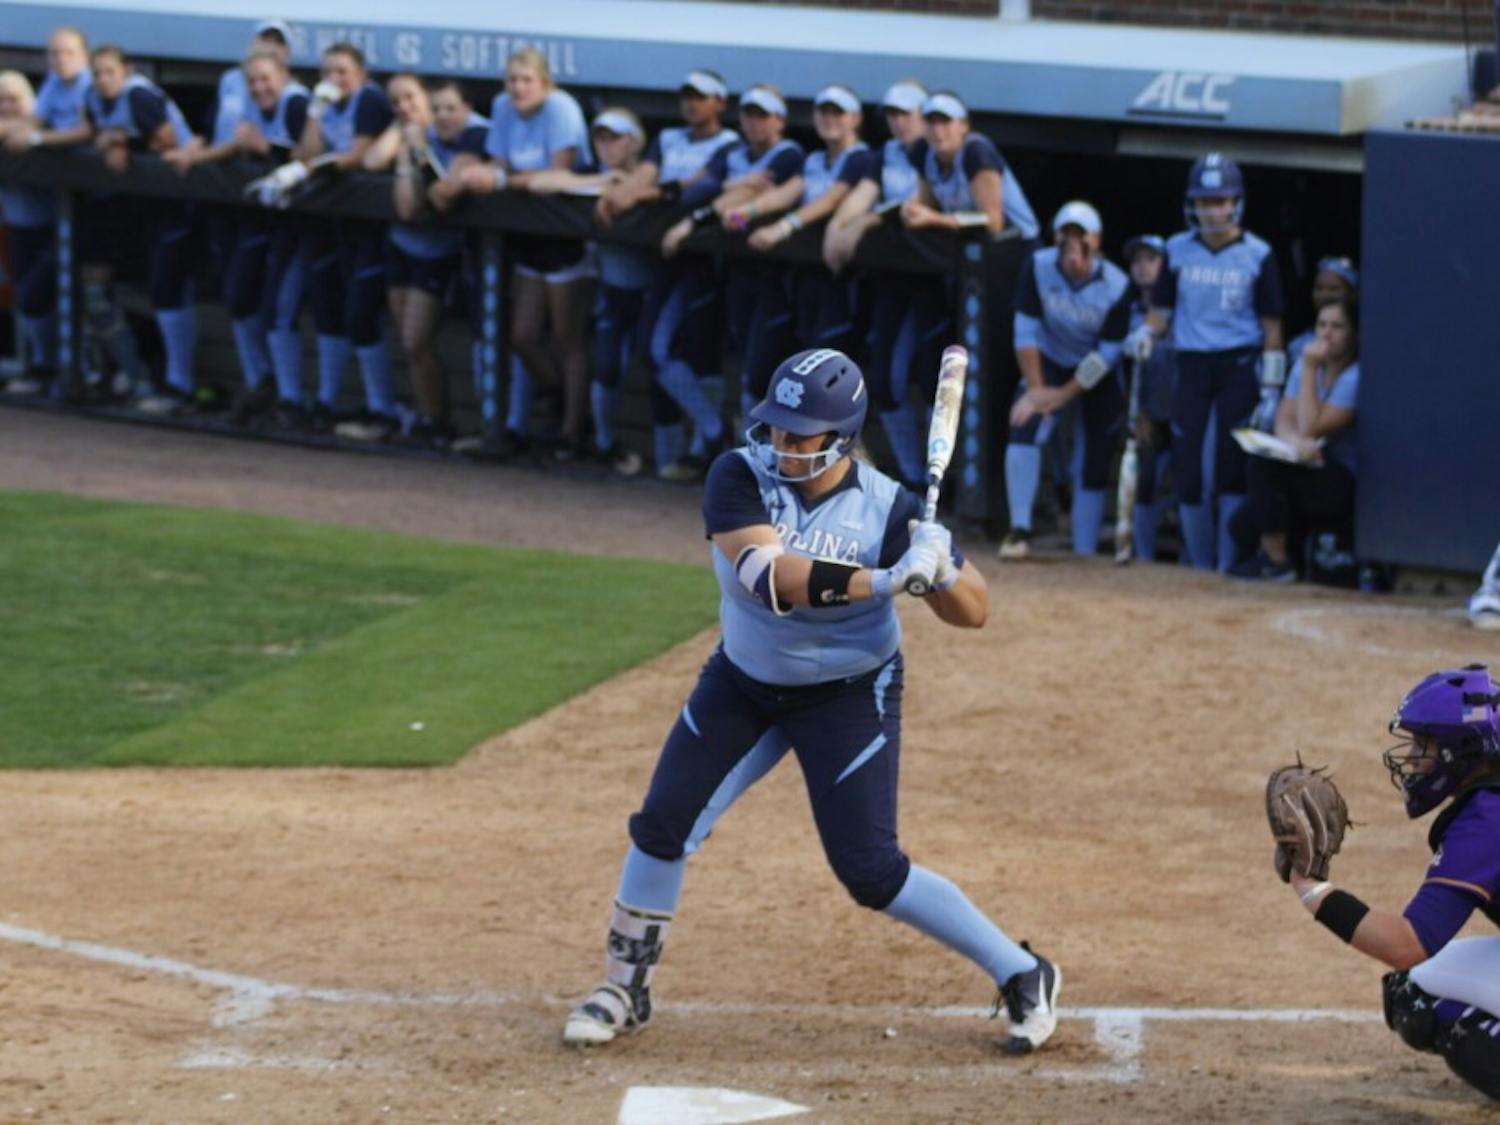 Brittany Pickett (28) prepares for a swing against ECU on April 18 in Anderson Stadium.